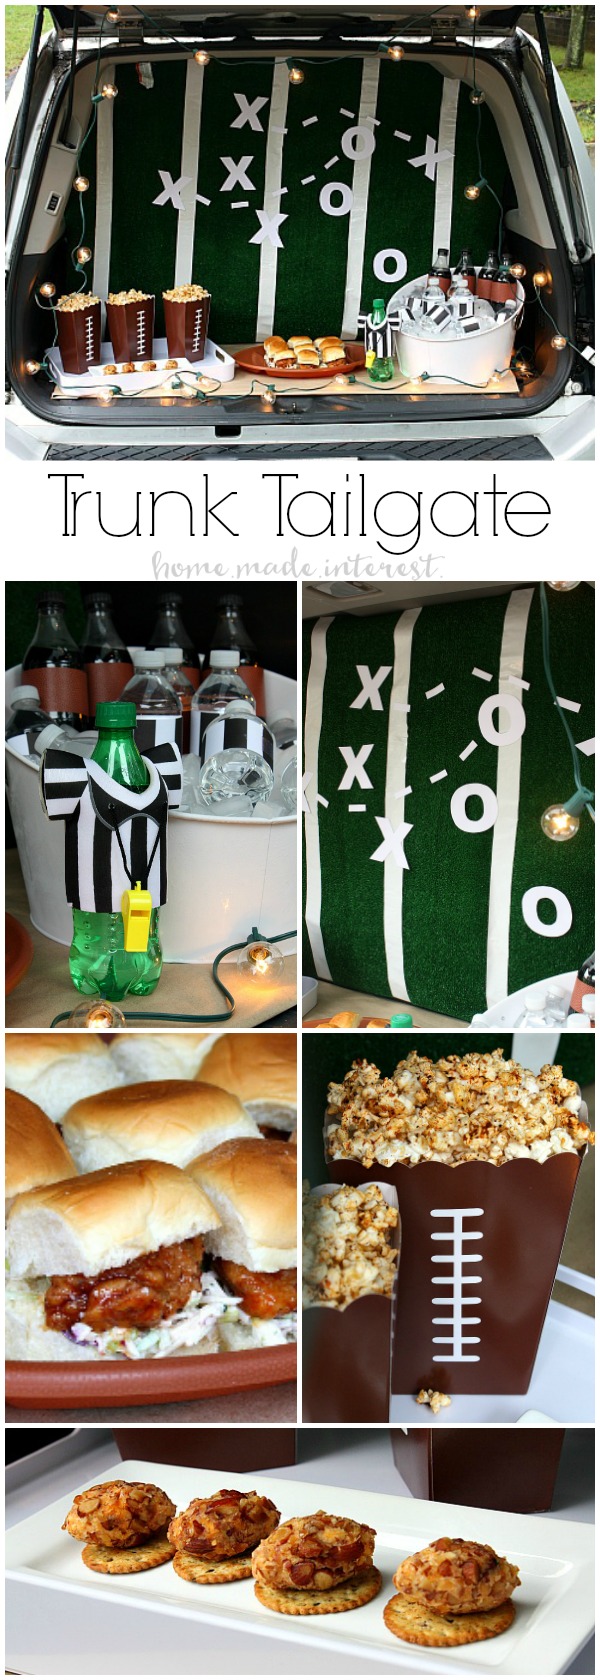  I love tailgating during football season and setting up a fun and easy Trunk Tailgating party is always a good time. I decorate my trunk for game day and serve game day appetizers like honey bbq sliders, bacon cheese balls, and bbq popcorn! My tailgate party tutorial is full of easy game day party or tailgate recipes and ideas. 